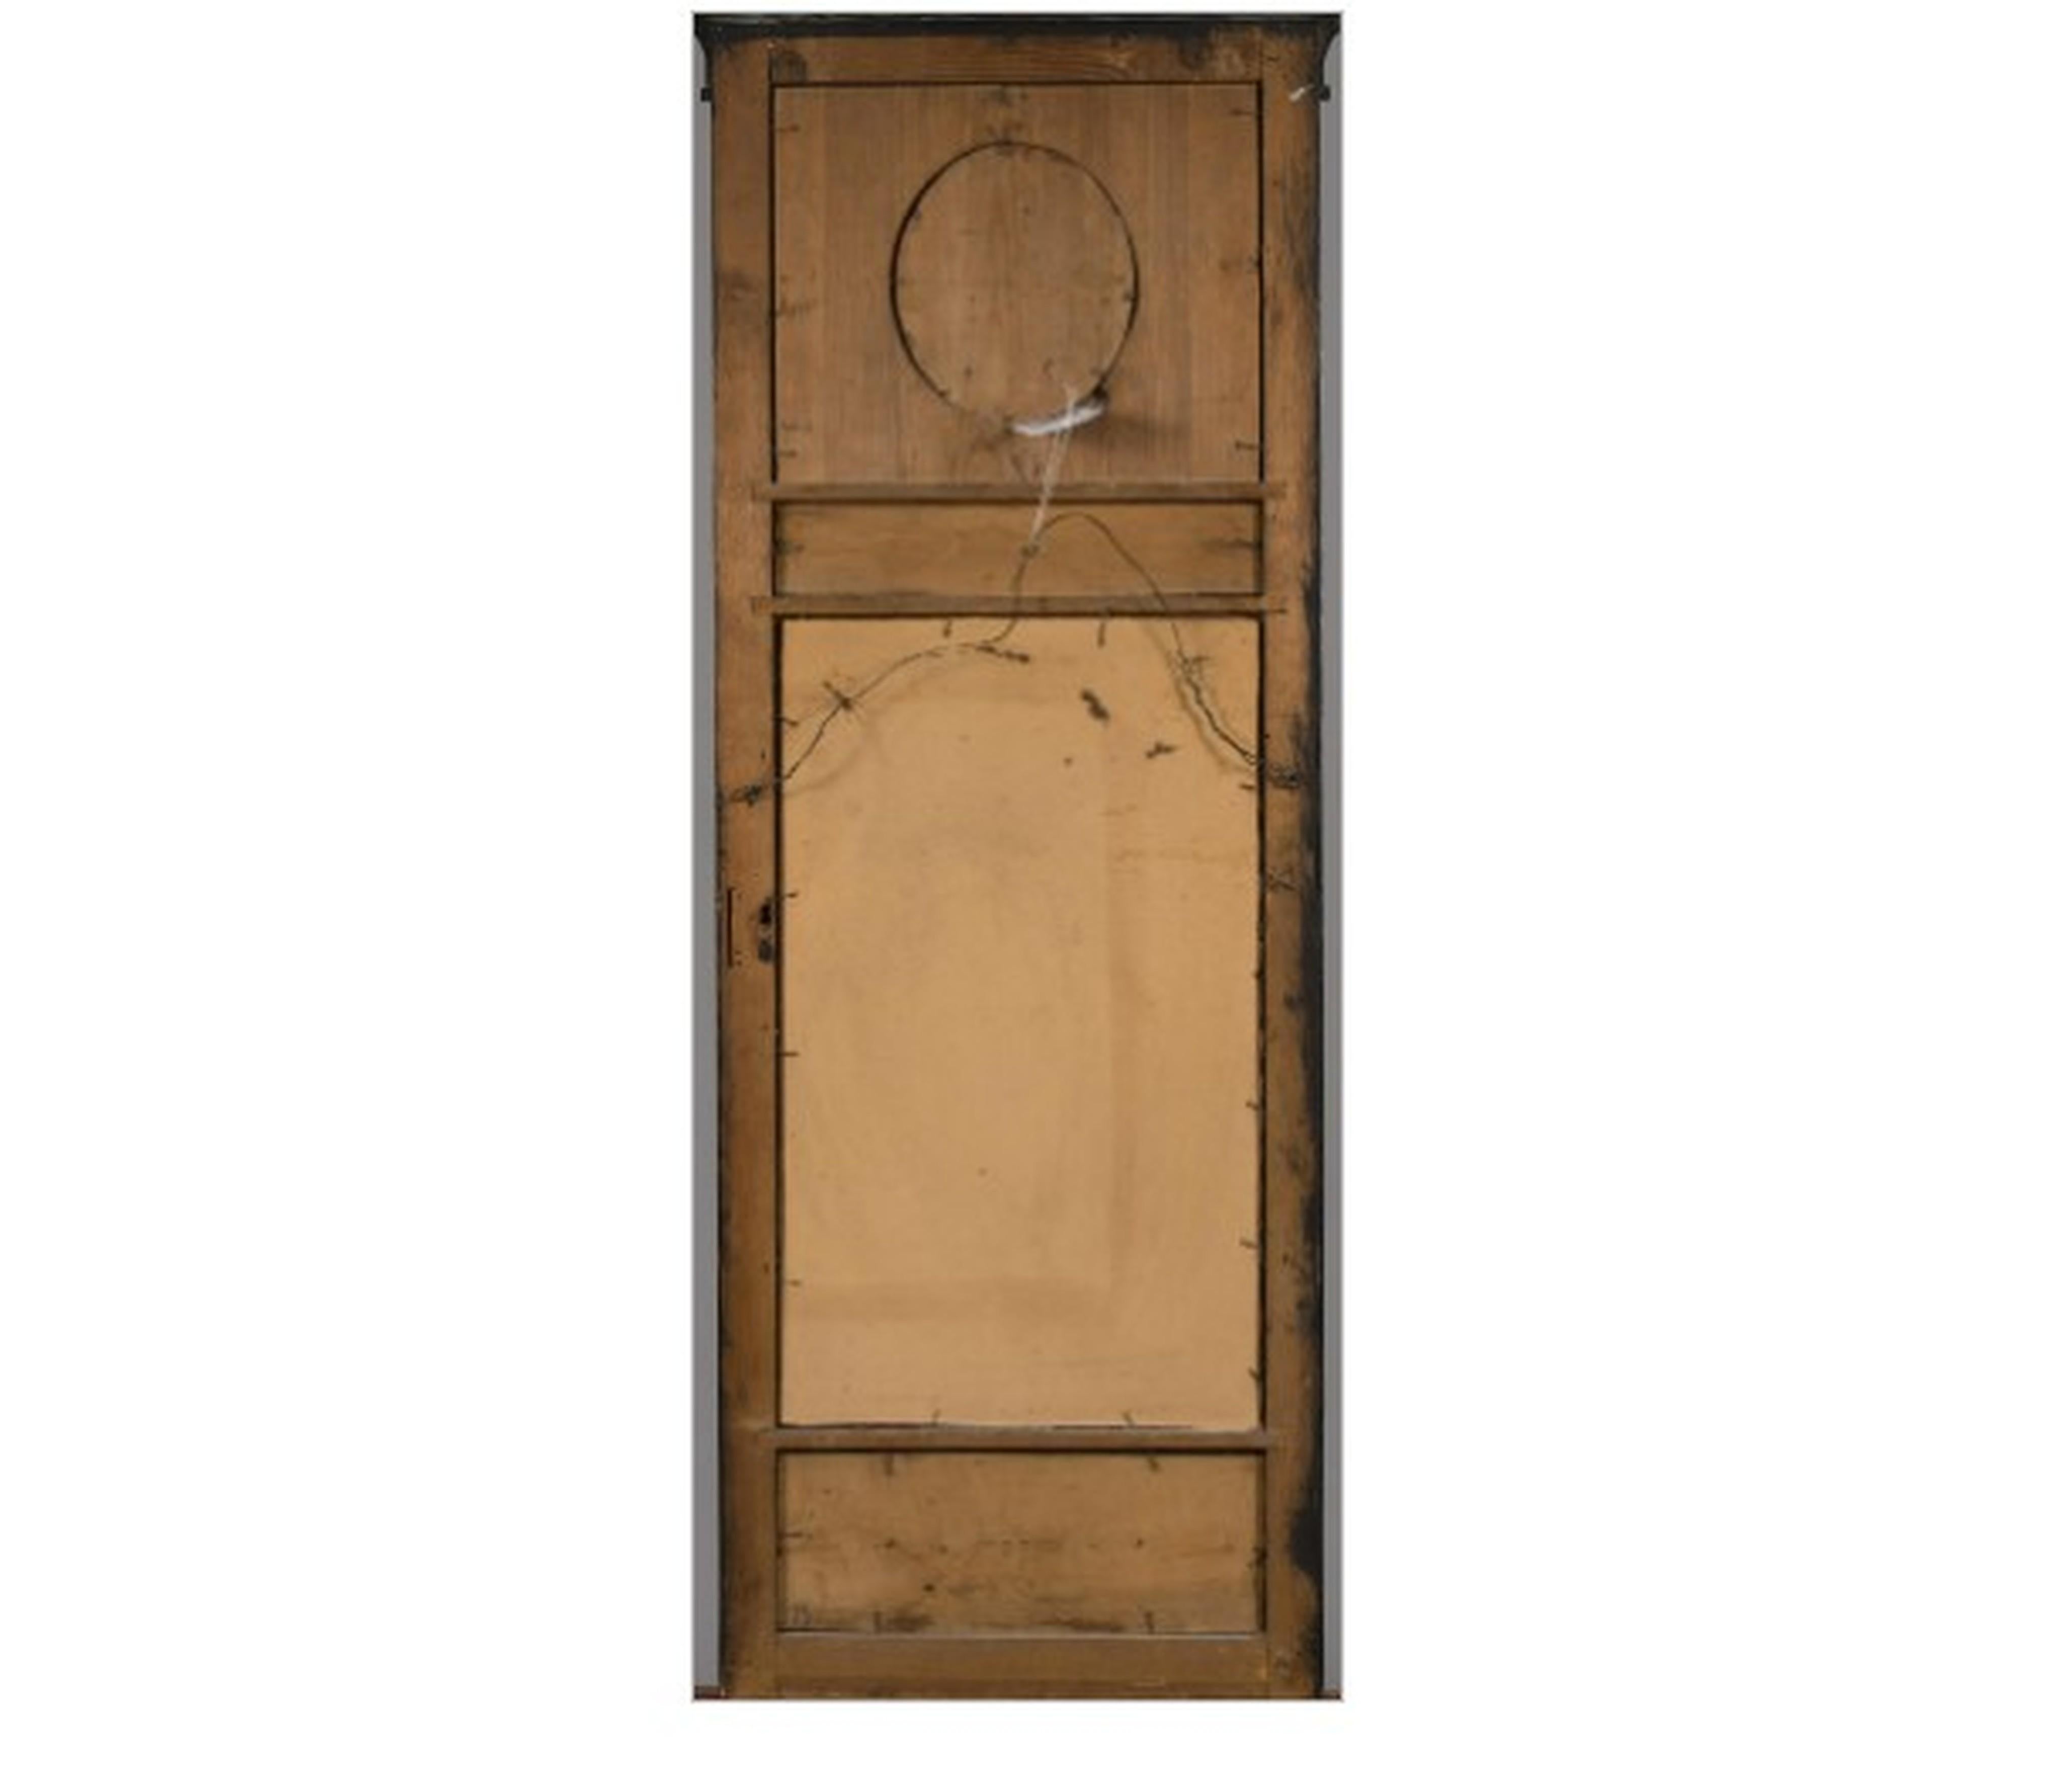 Hand-Painted Empire Mirror, Early 19th Century For Sale